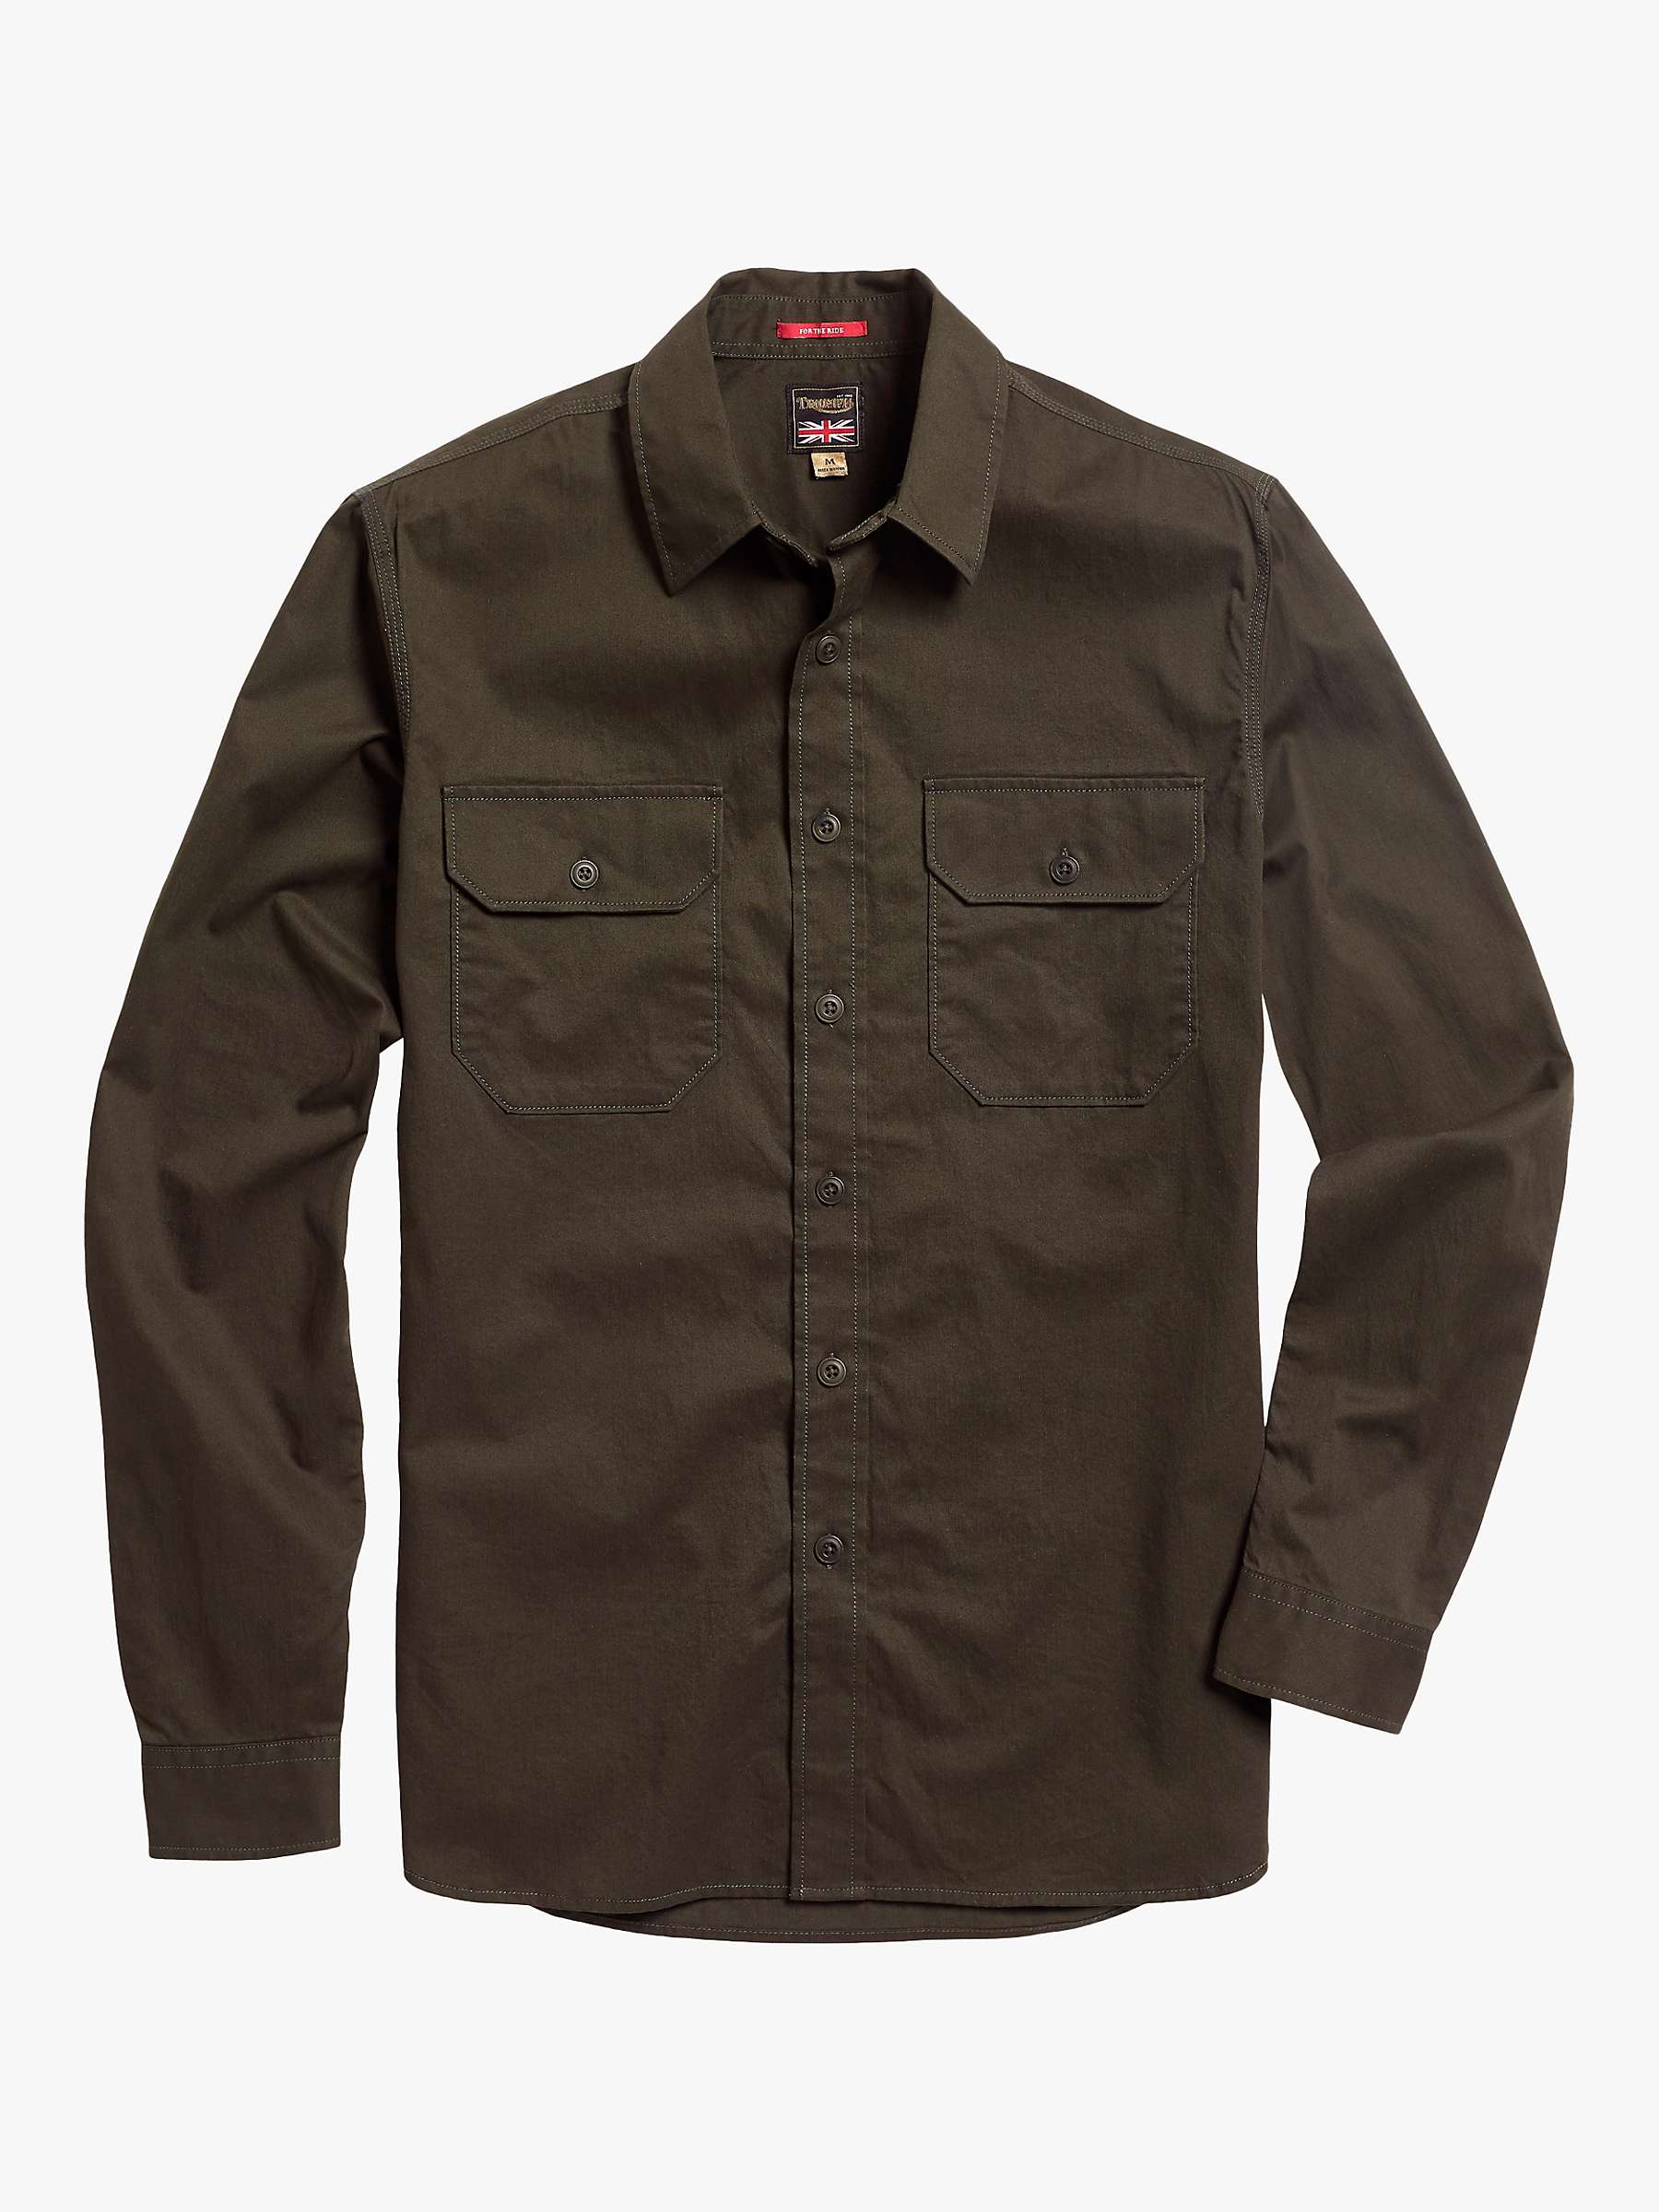 Buy Triumph Motorcycles Riley Shirt Online at johnlewis.com